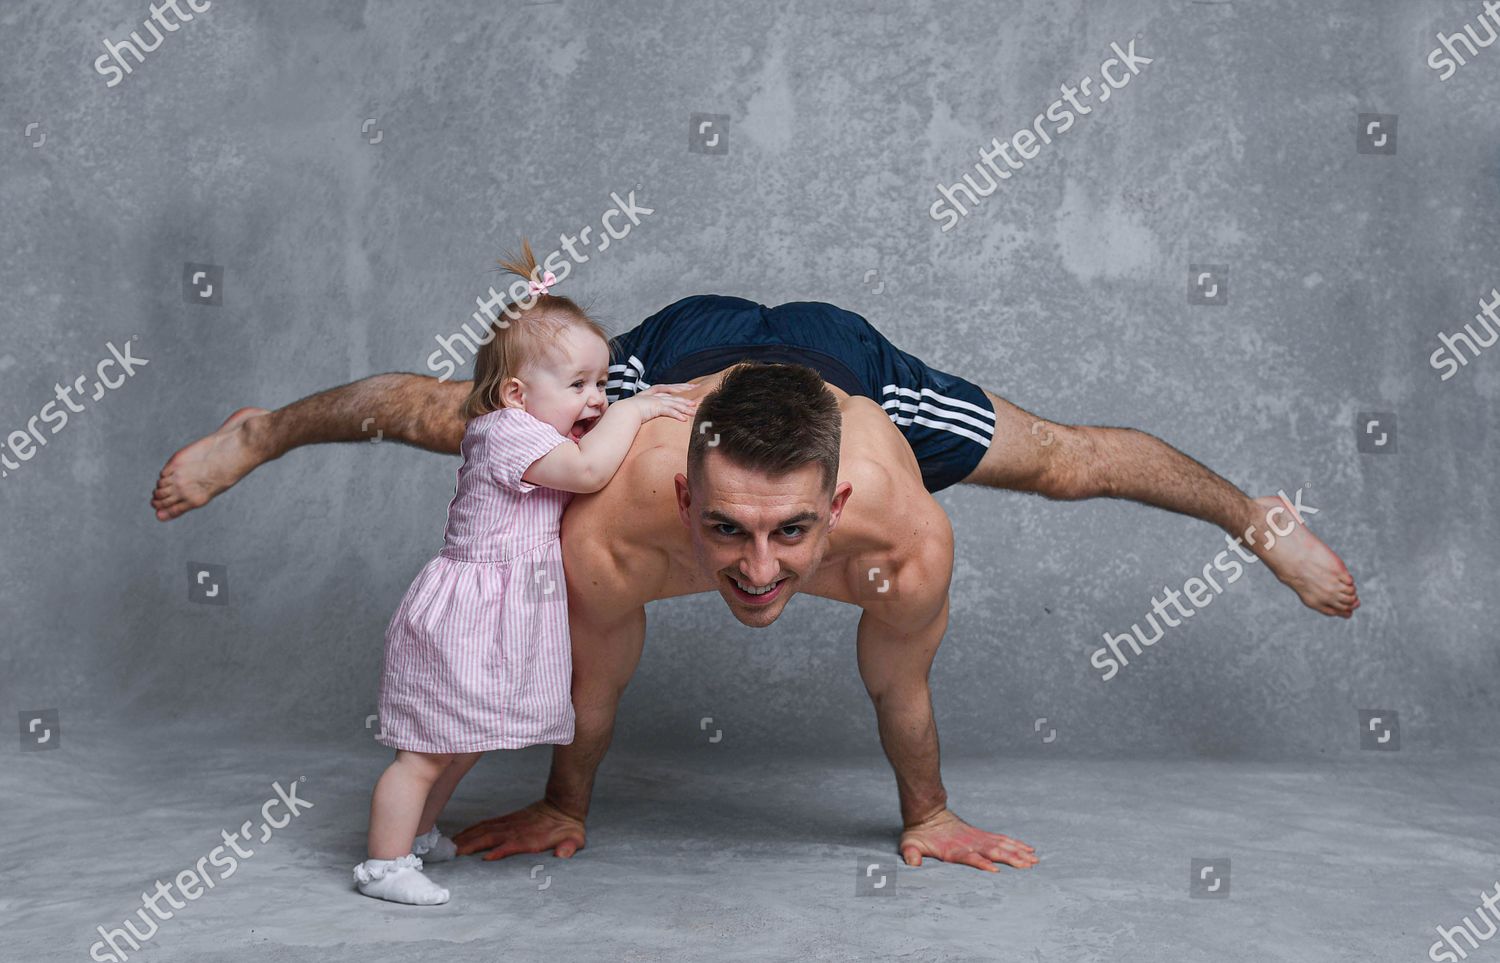 Max Whitlock 11monthold Daughter Willow Editorial Stock Photo Stock Image Shutterstock